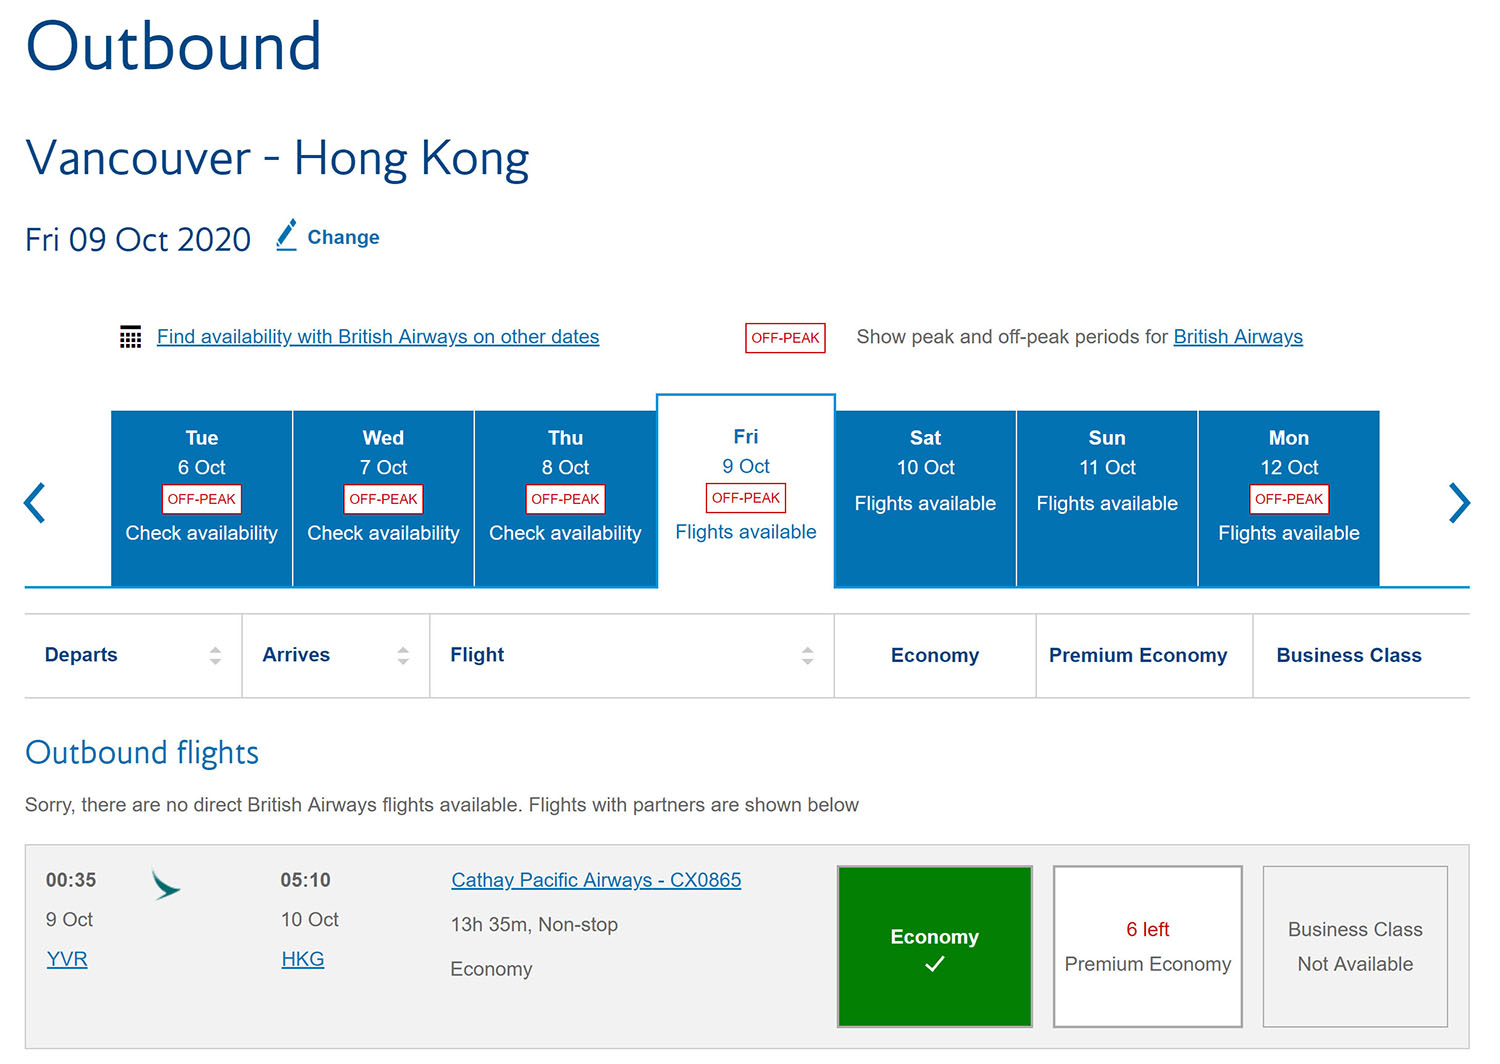 Select your outbound departing flight - YVR > HKG